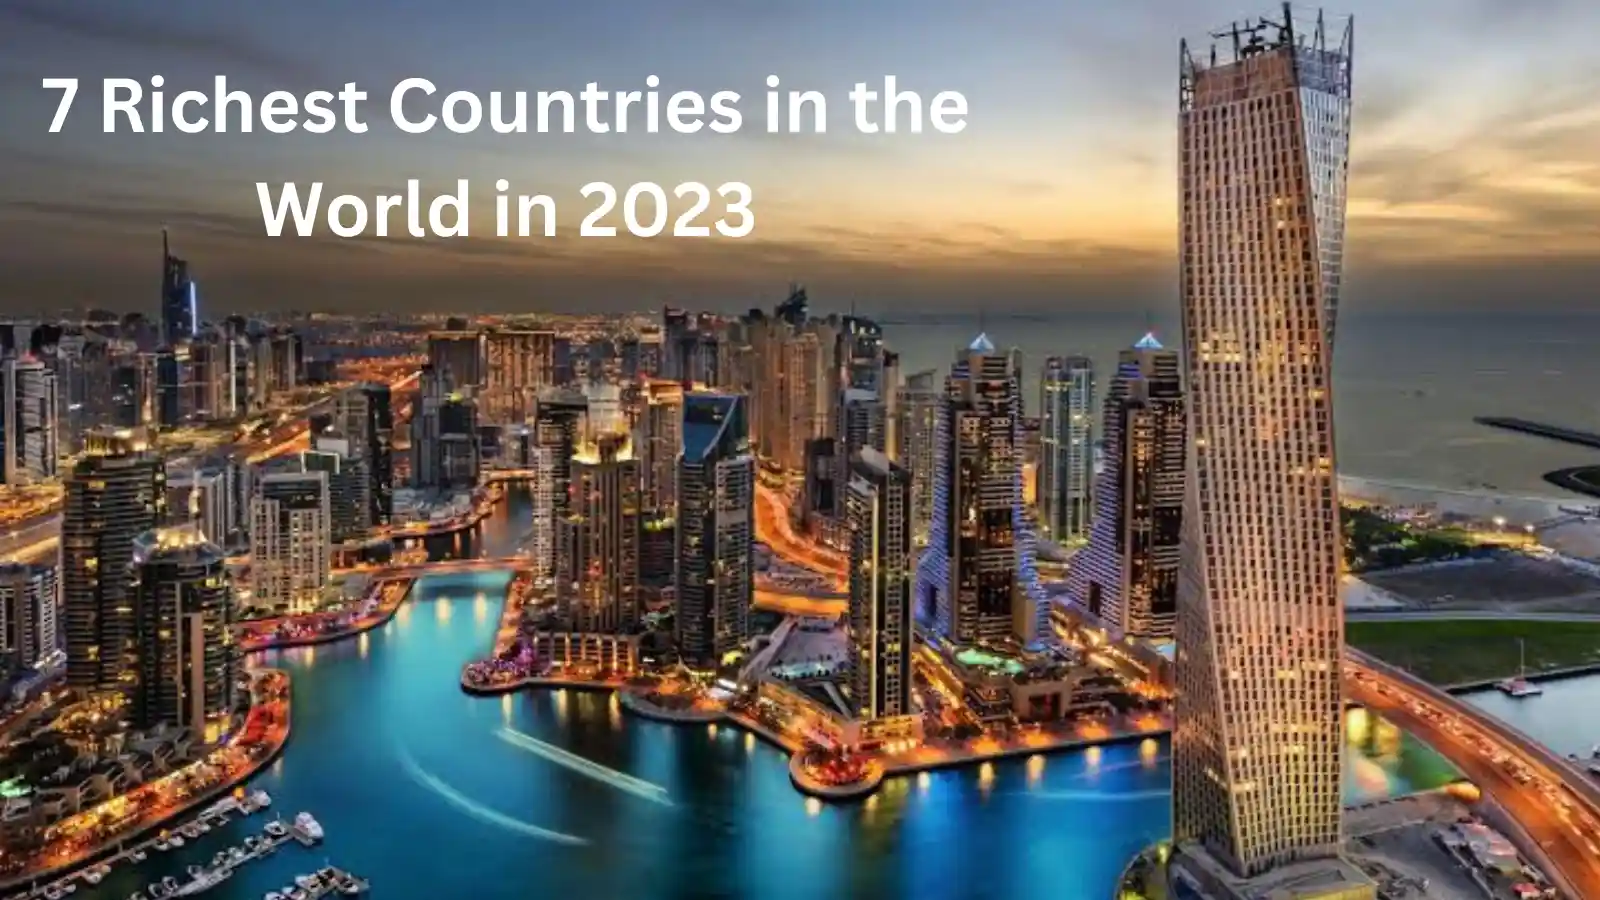 7 Richest Countries in the World in 2023